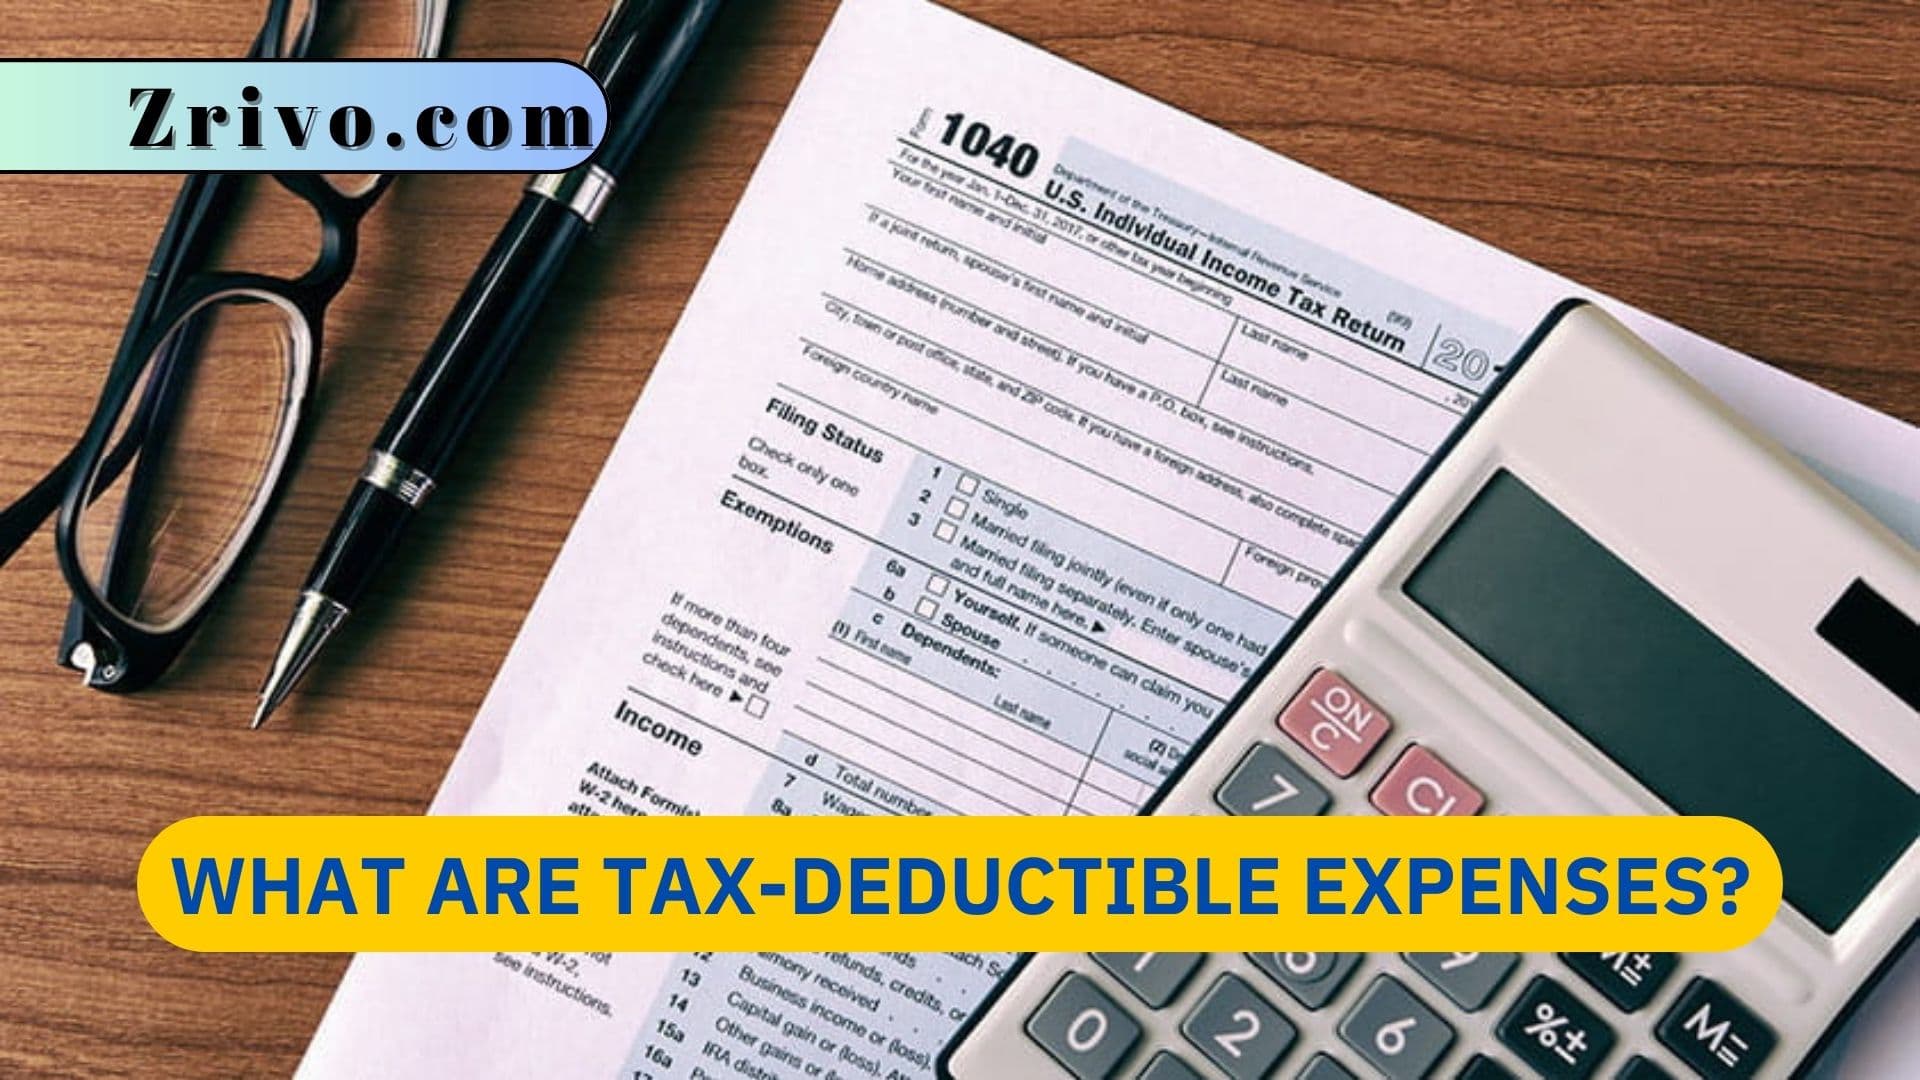 What are Tax-Deductible Expenses